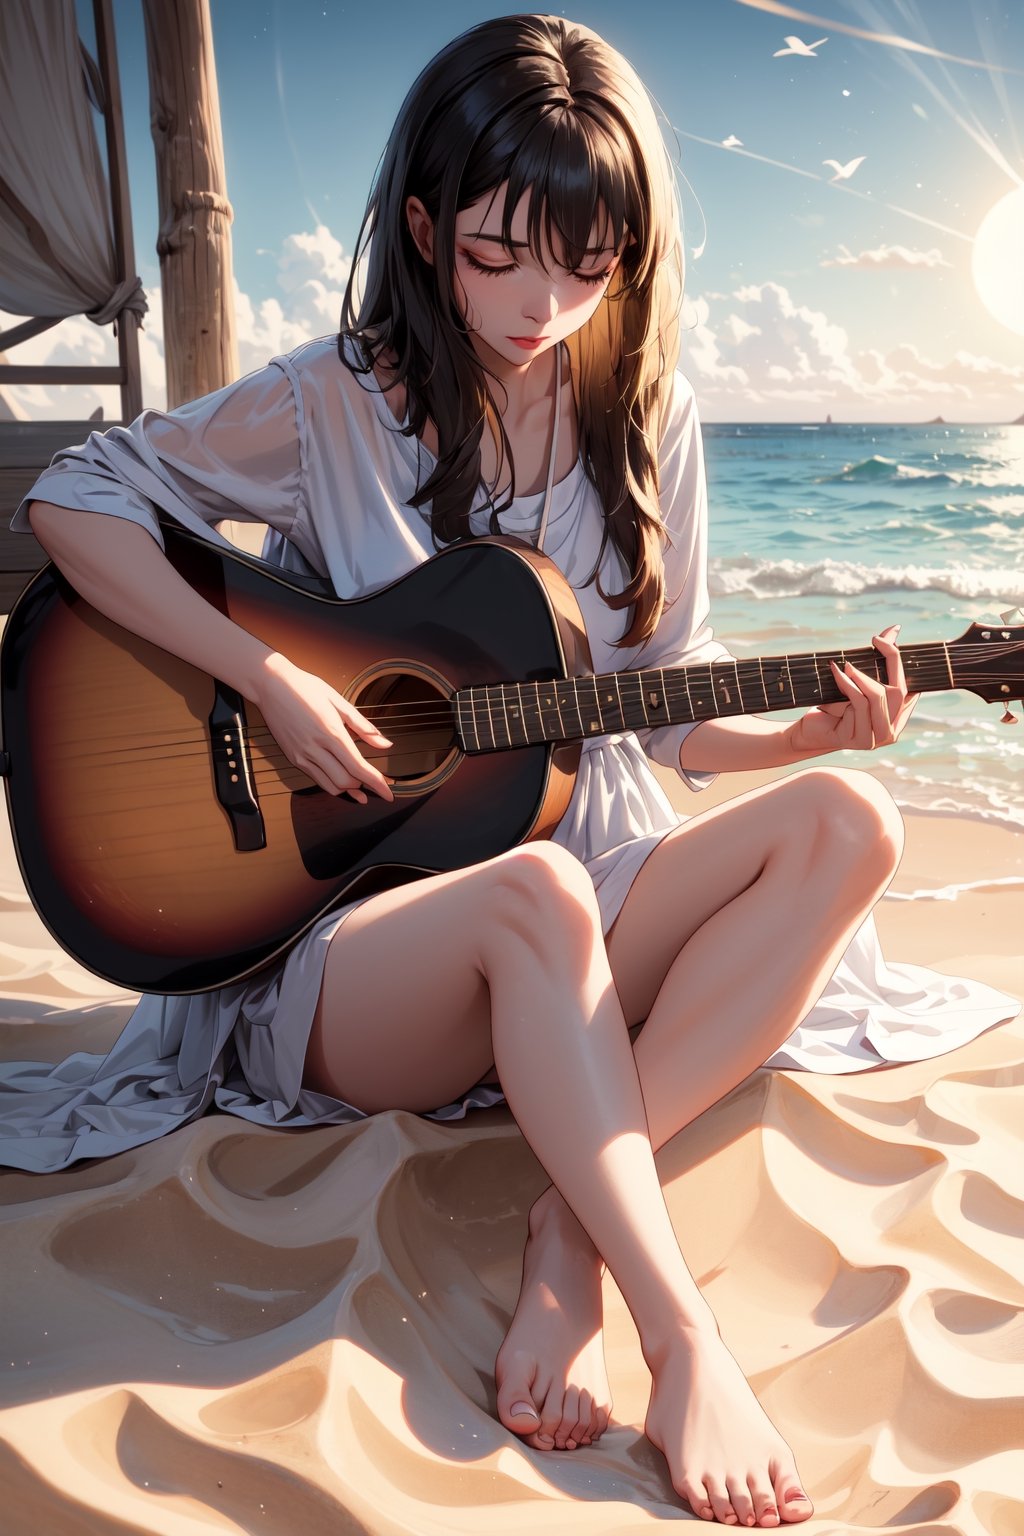 In this photographic scene, a woman finds solace on a beach, her toes sinking into the golden sand. The sound of her guitar resonates through the air as the sun reaches its peak, creating peaceful midday vista, open eyes,kitagawa marin